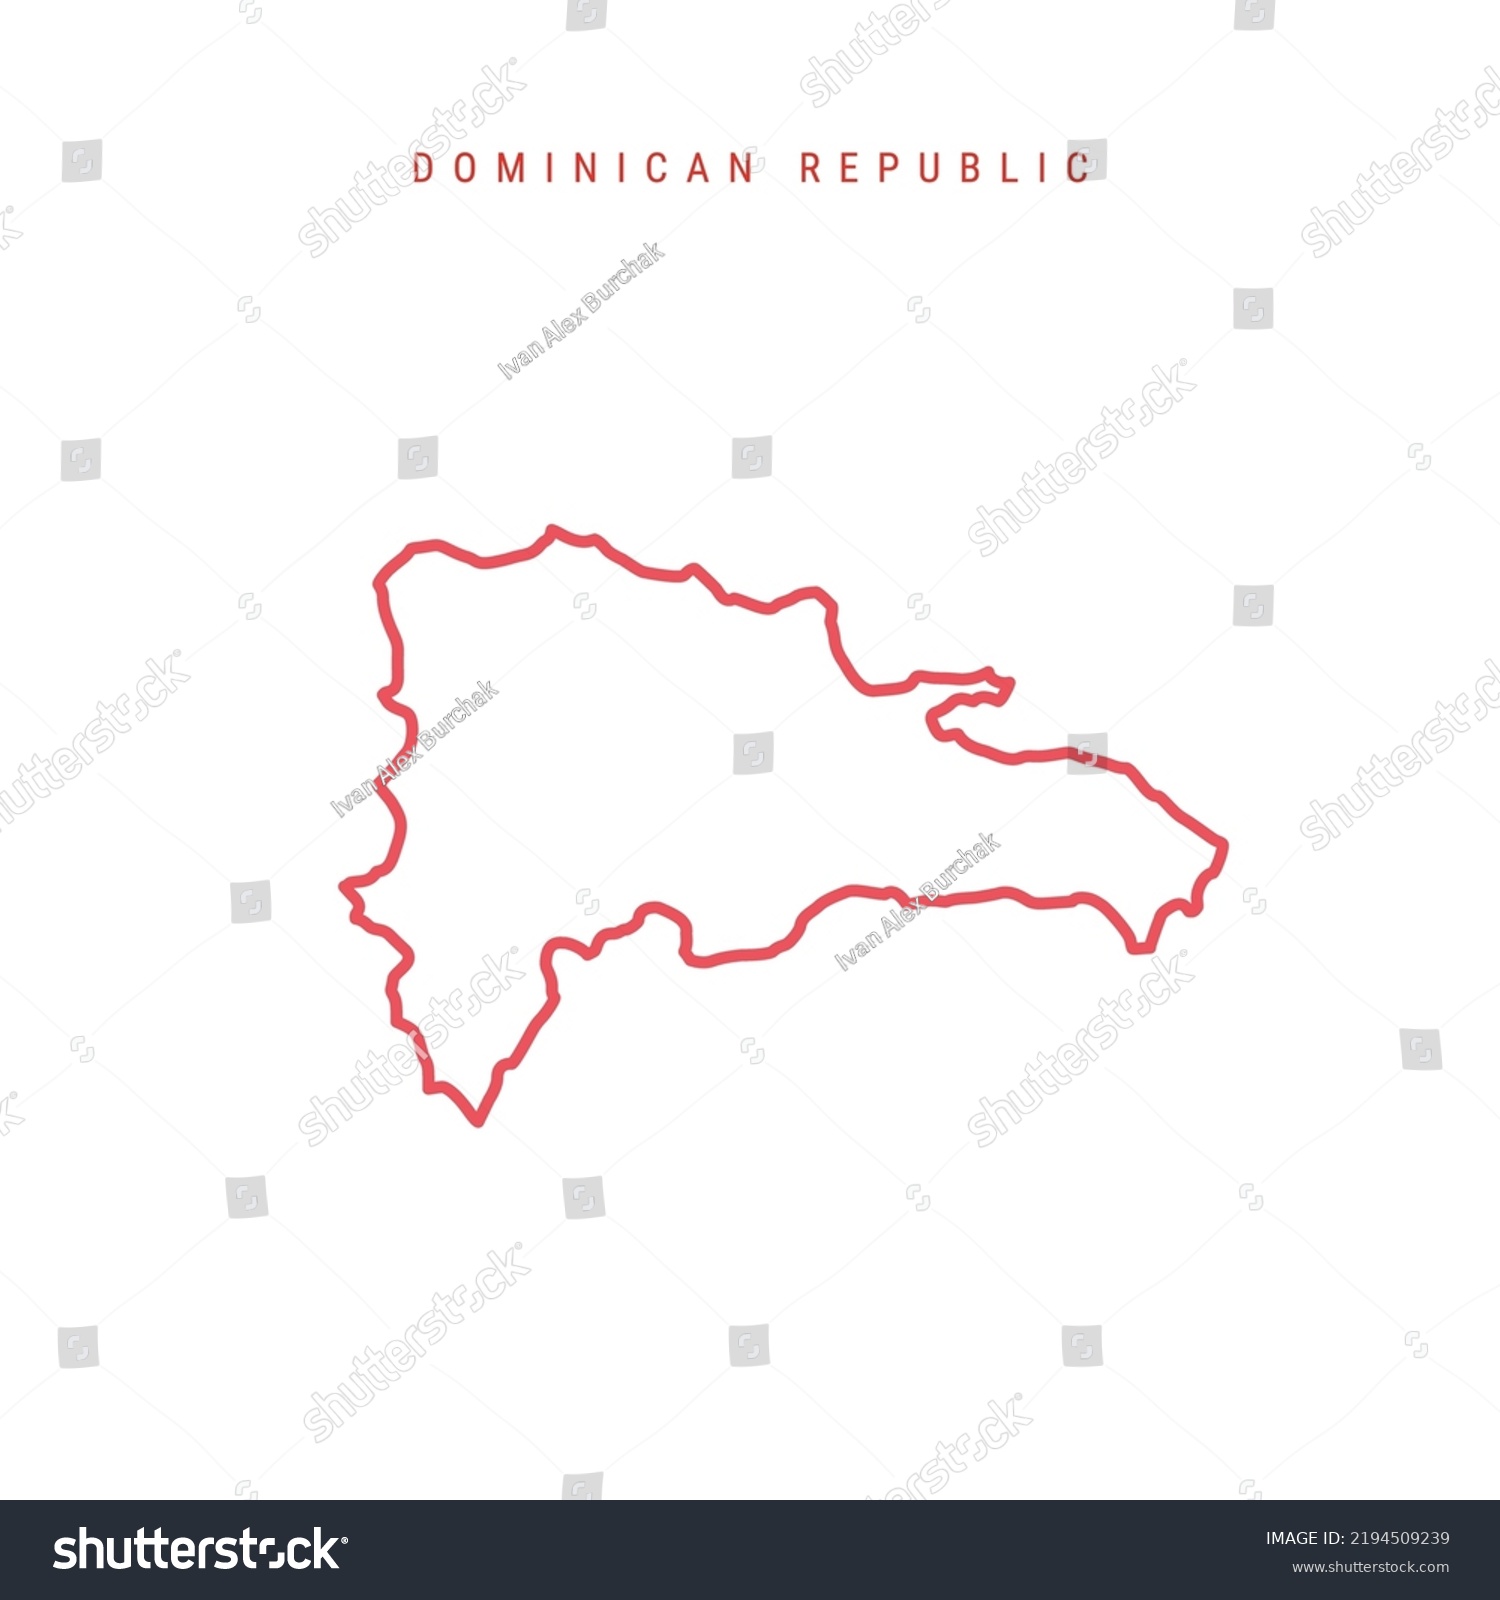 Dominican Republic editable outline map. Republica Dominicana red border. Country name. Adjust line weight. Change to any color. Vector illustration. #2194509239